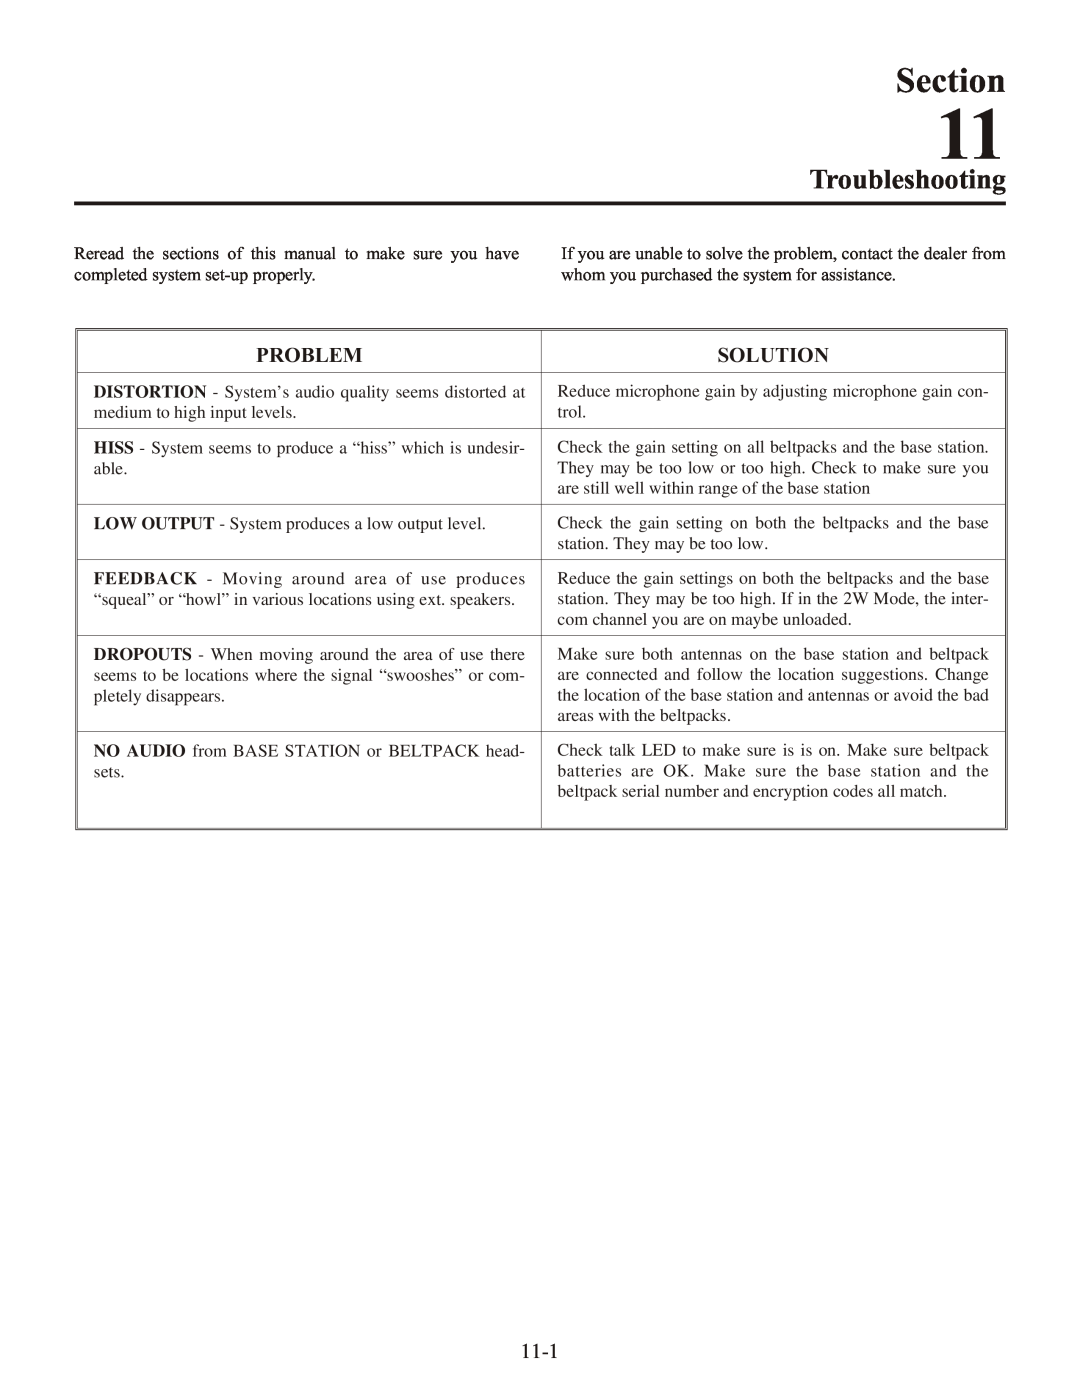 Telex BTR-1 operating instructions Troubleshooting, Section, Problem, Solution 